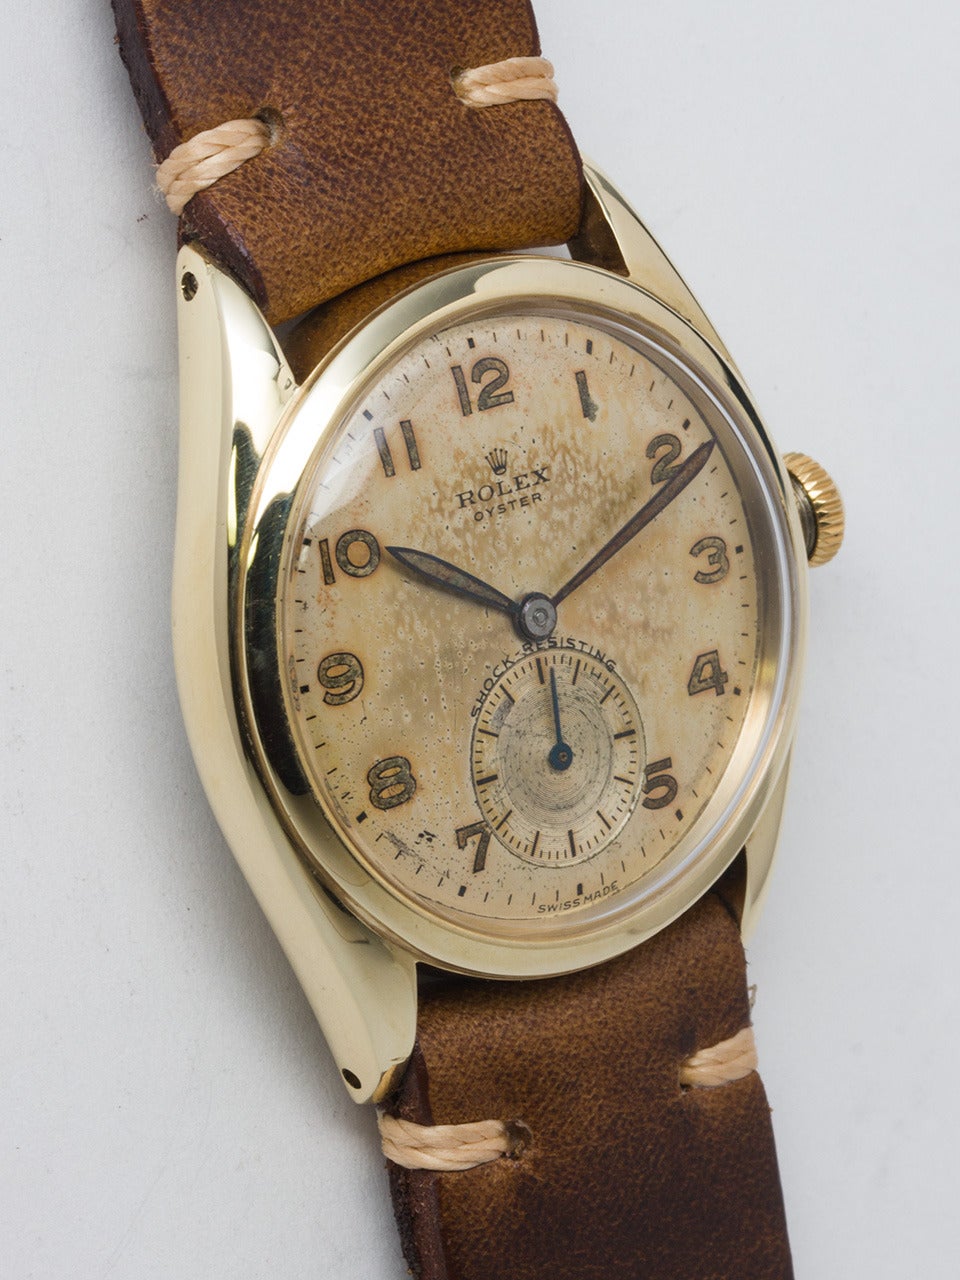 Rolex yellow gold top and stainless steel back Oyster wristwatch, Ref. 5022, circa 1948. 33mm case with acrylic crystal and signed crown. Very pleasing original luminous Arabic dial with nice patina. Manual-wind movement with subsidiary